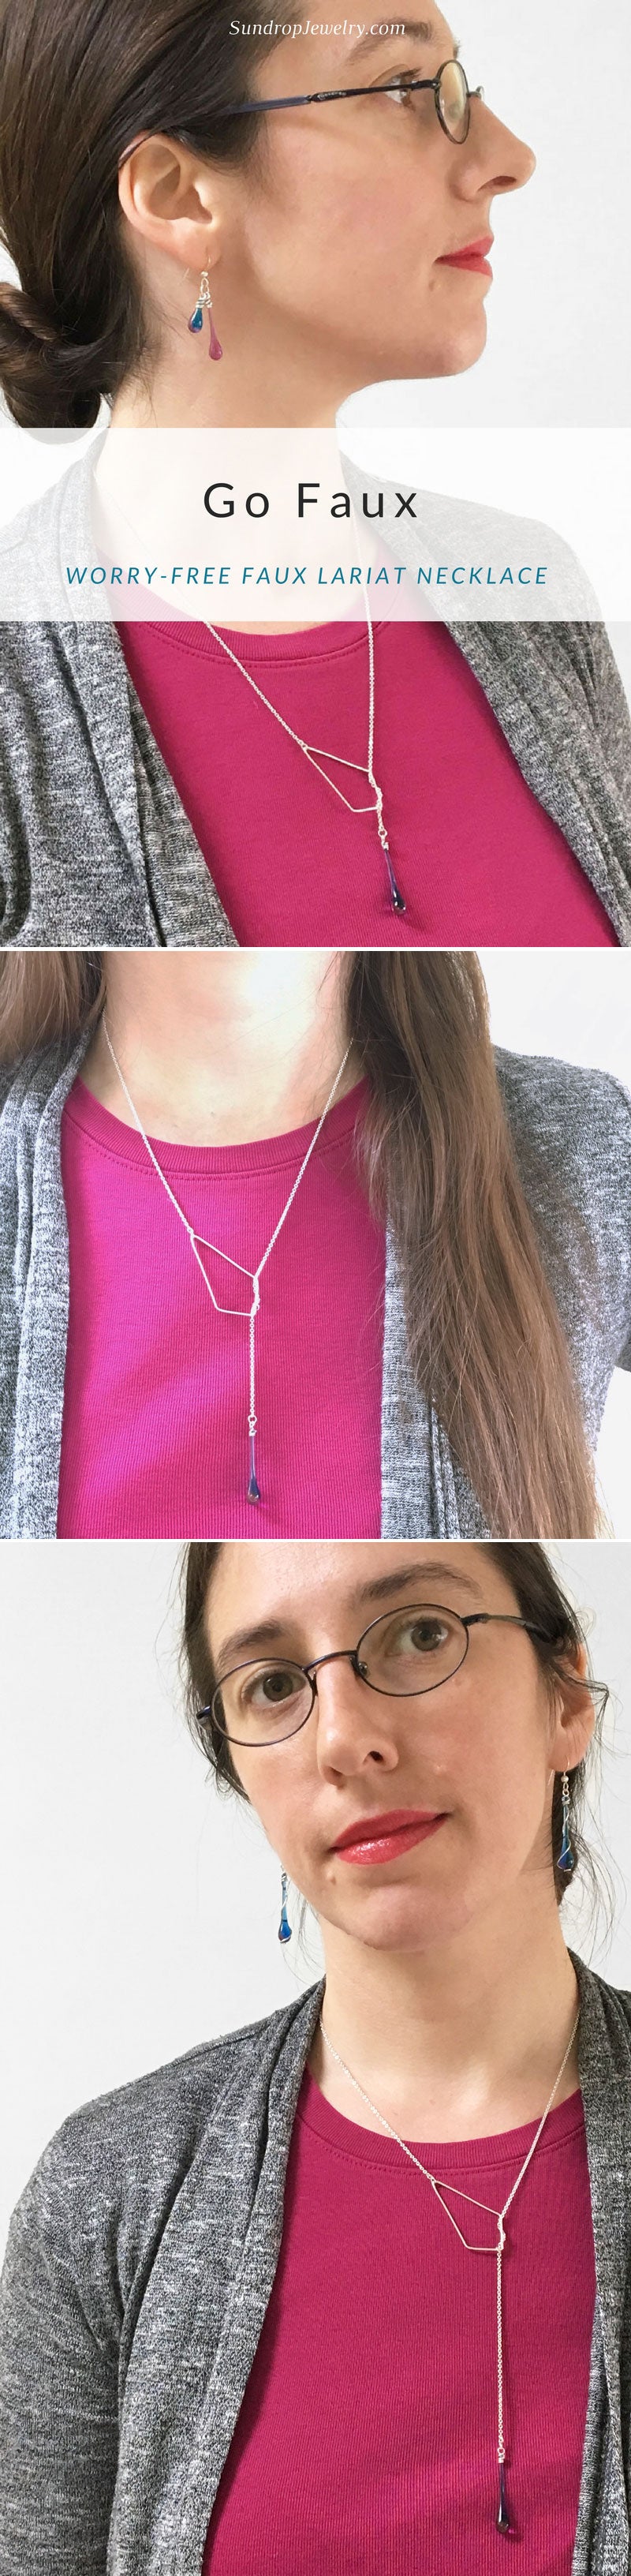 Worry-free faux lariat necklace, featuring sterling silver kite and glass teardrop || by Sundrop Jewelry